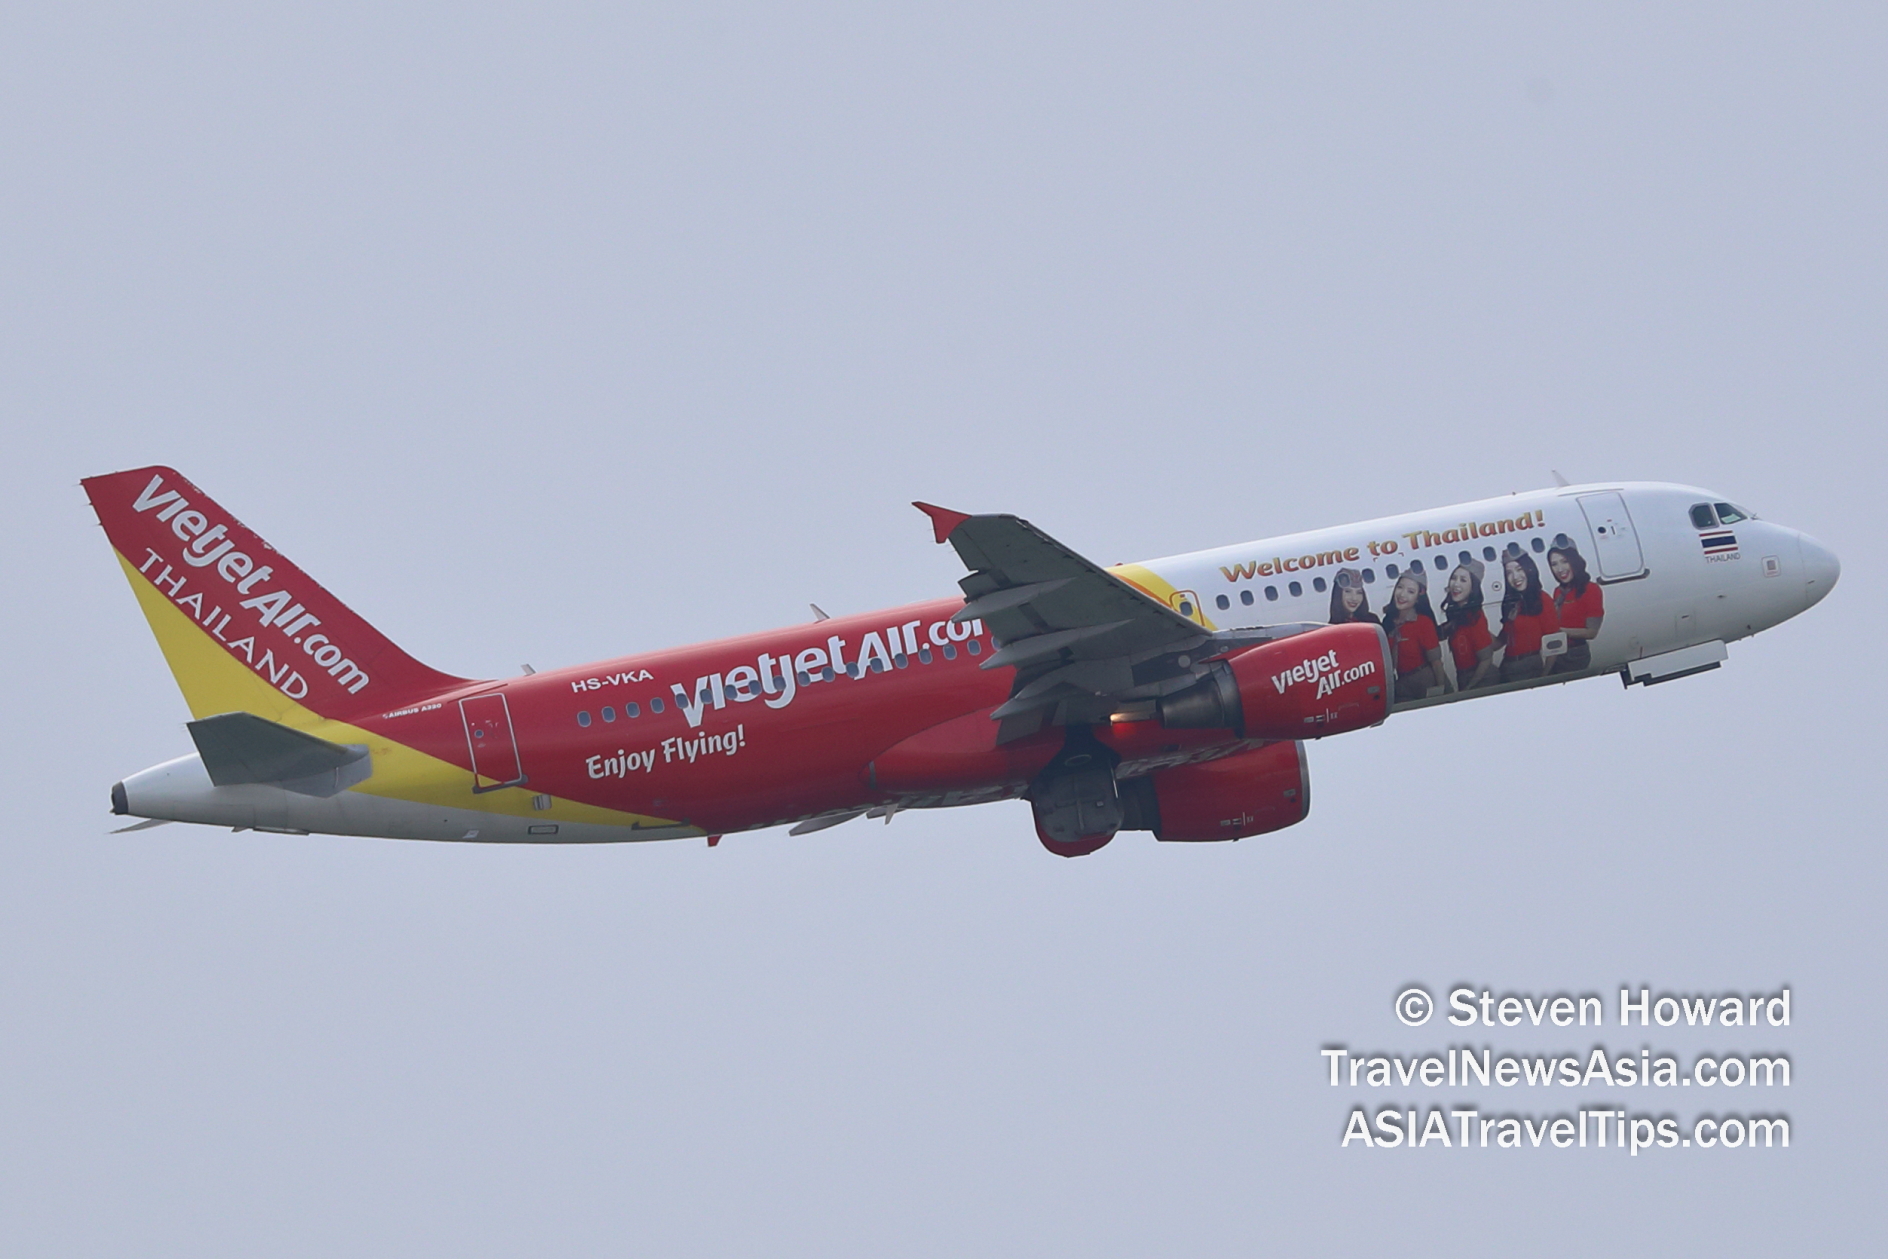 Thai Vietjet A320 reg: HS-VKA. Picture by Steven Howard of TravelNewsAsia.com Click to enlarge.